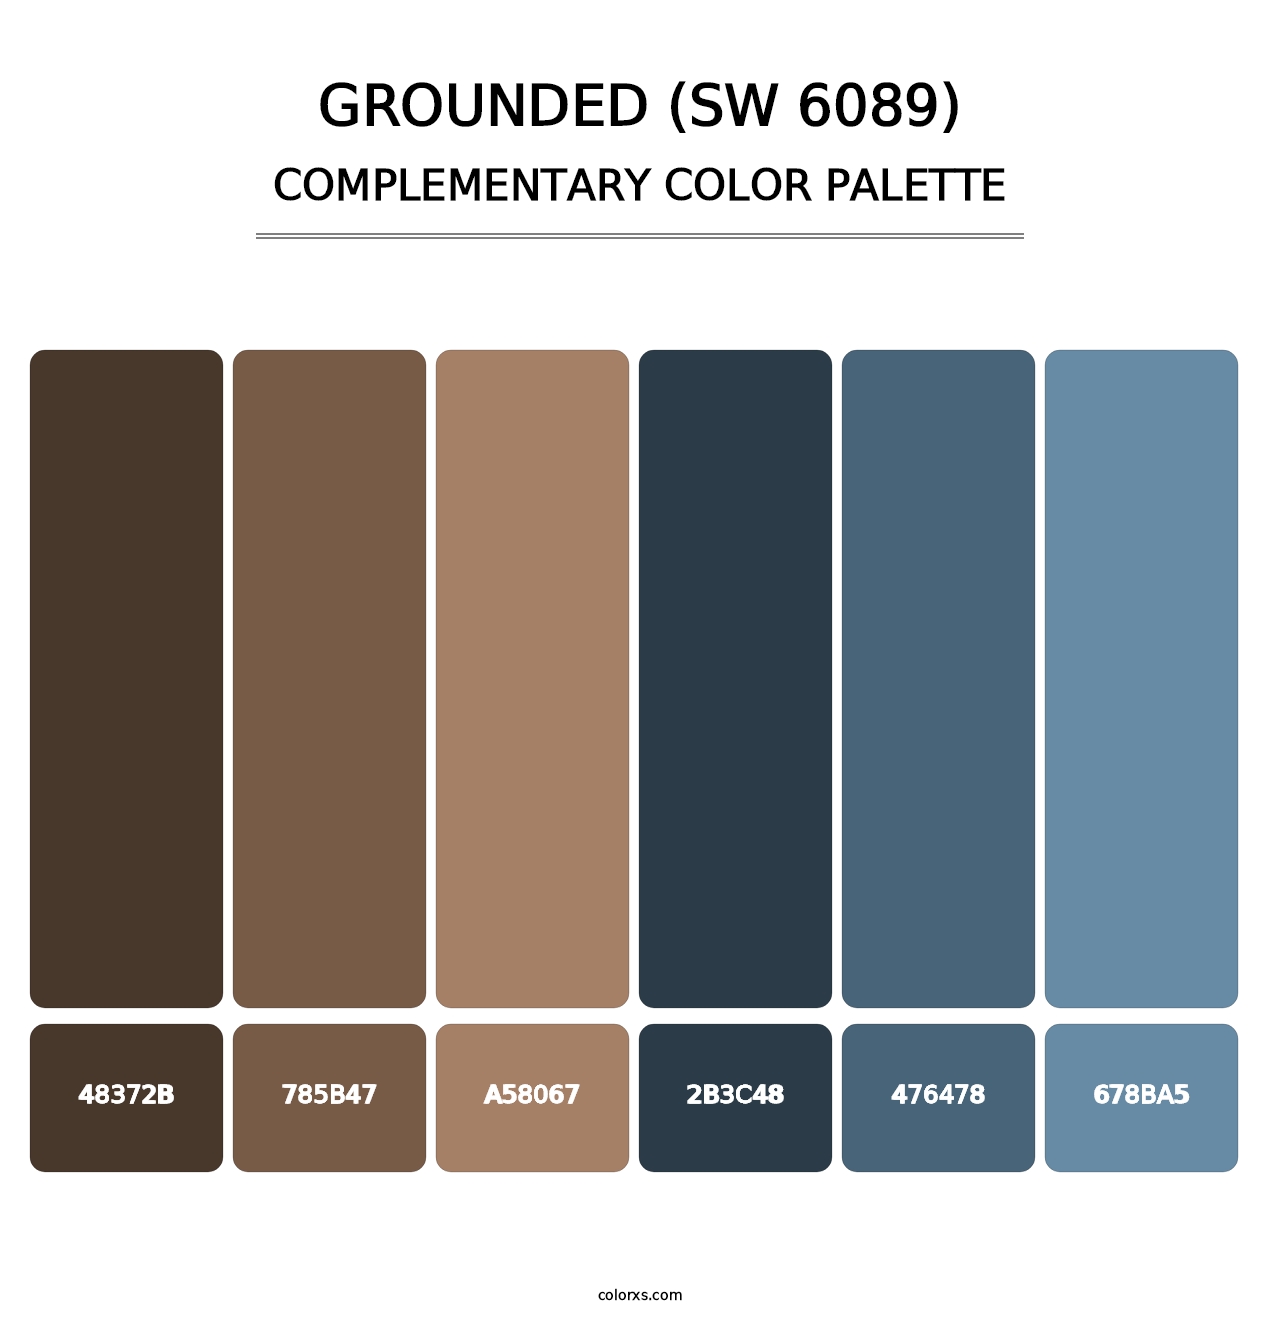 Grounded (SW 6089) - Complementary Color Palette